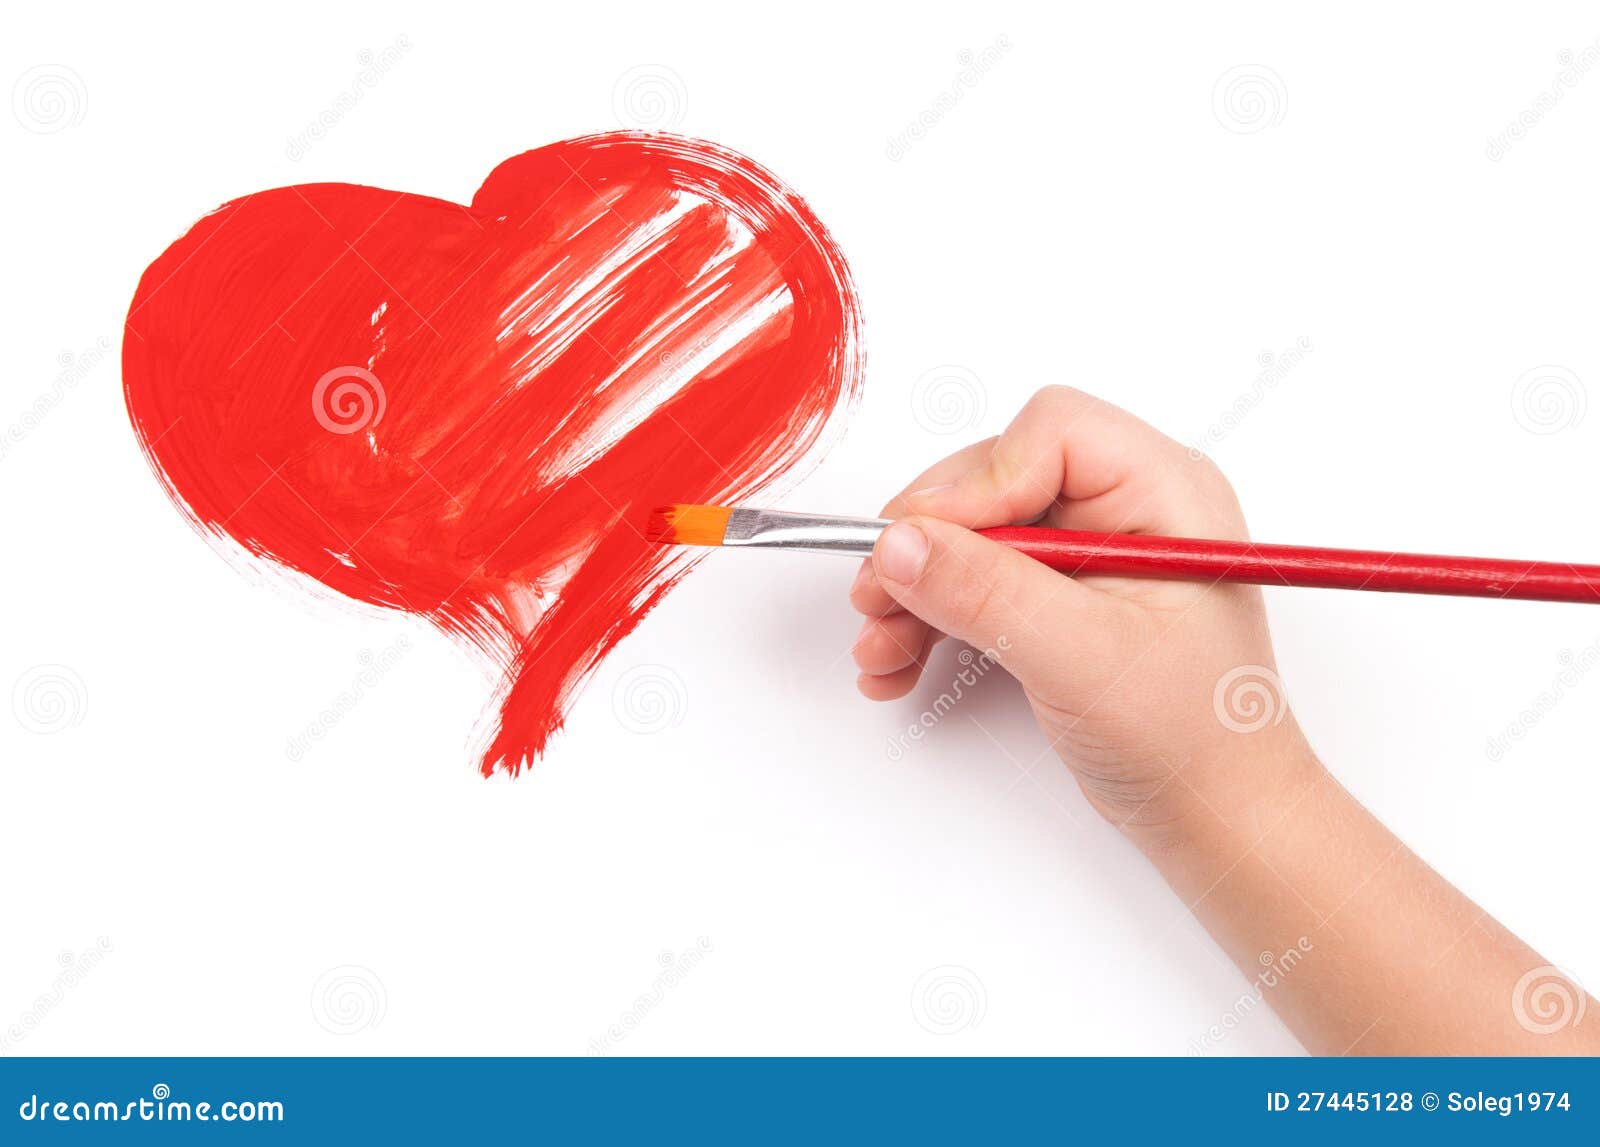 how to draw a love heart